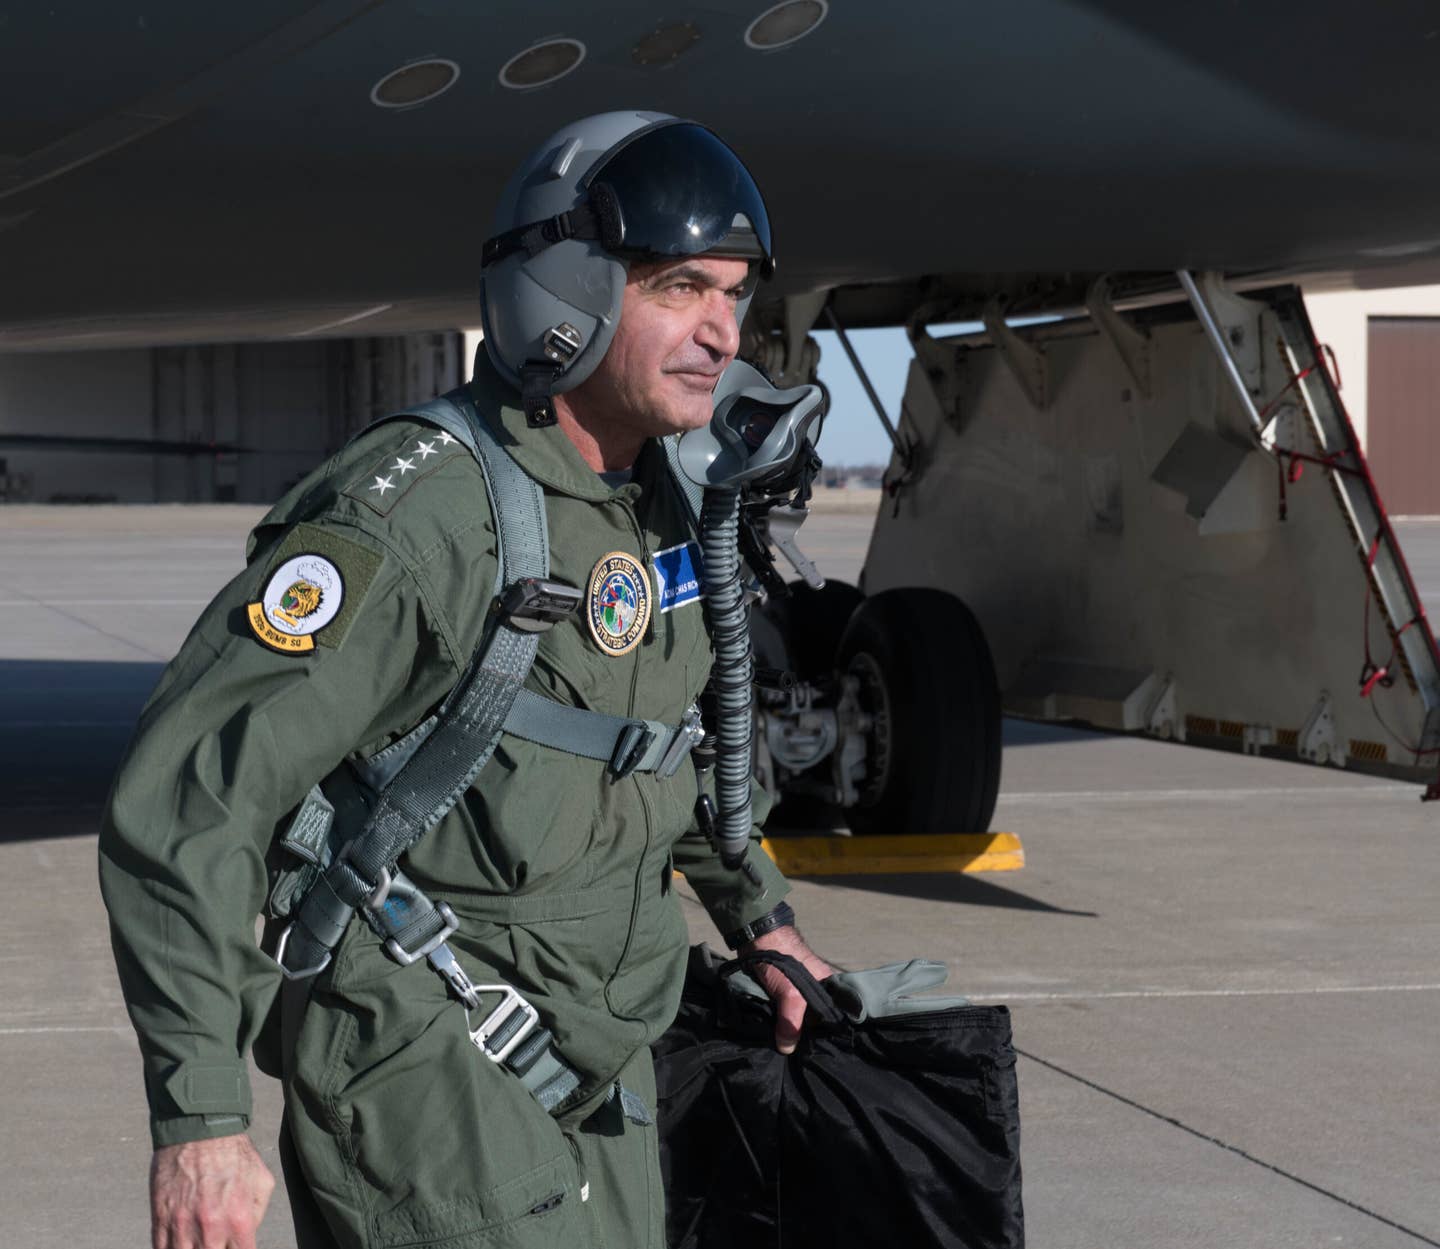 U.S. Navy Adm. Charles Richard, commander of U.S. Strategic Command, walks away from a B-2 Spirit Stealth Bomber after a familiarization flight at Whiteman Air Force Base, Missouri, March 5, 2020. (U.S. Air Force Photo by Airman 1st Class Thomas Johns)